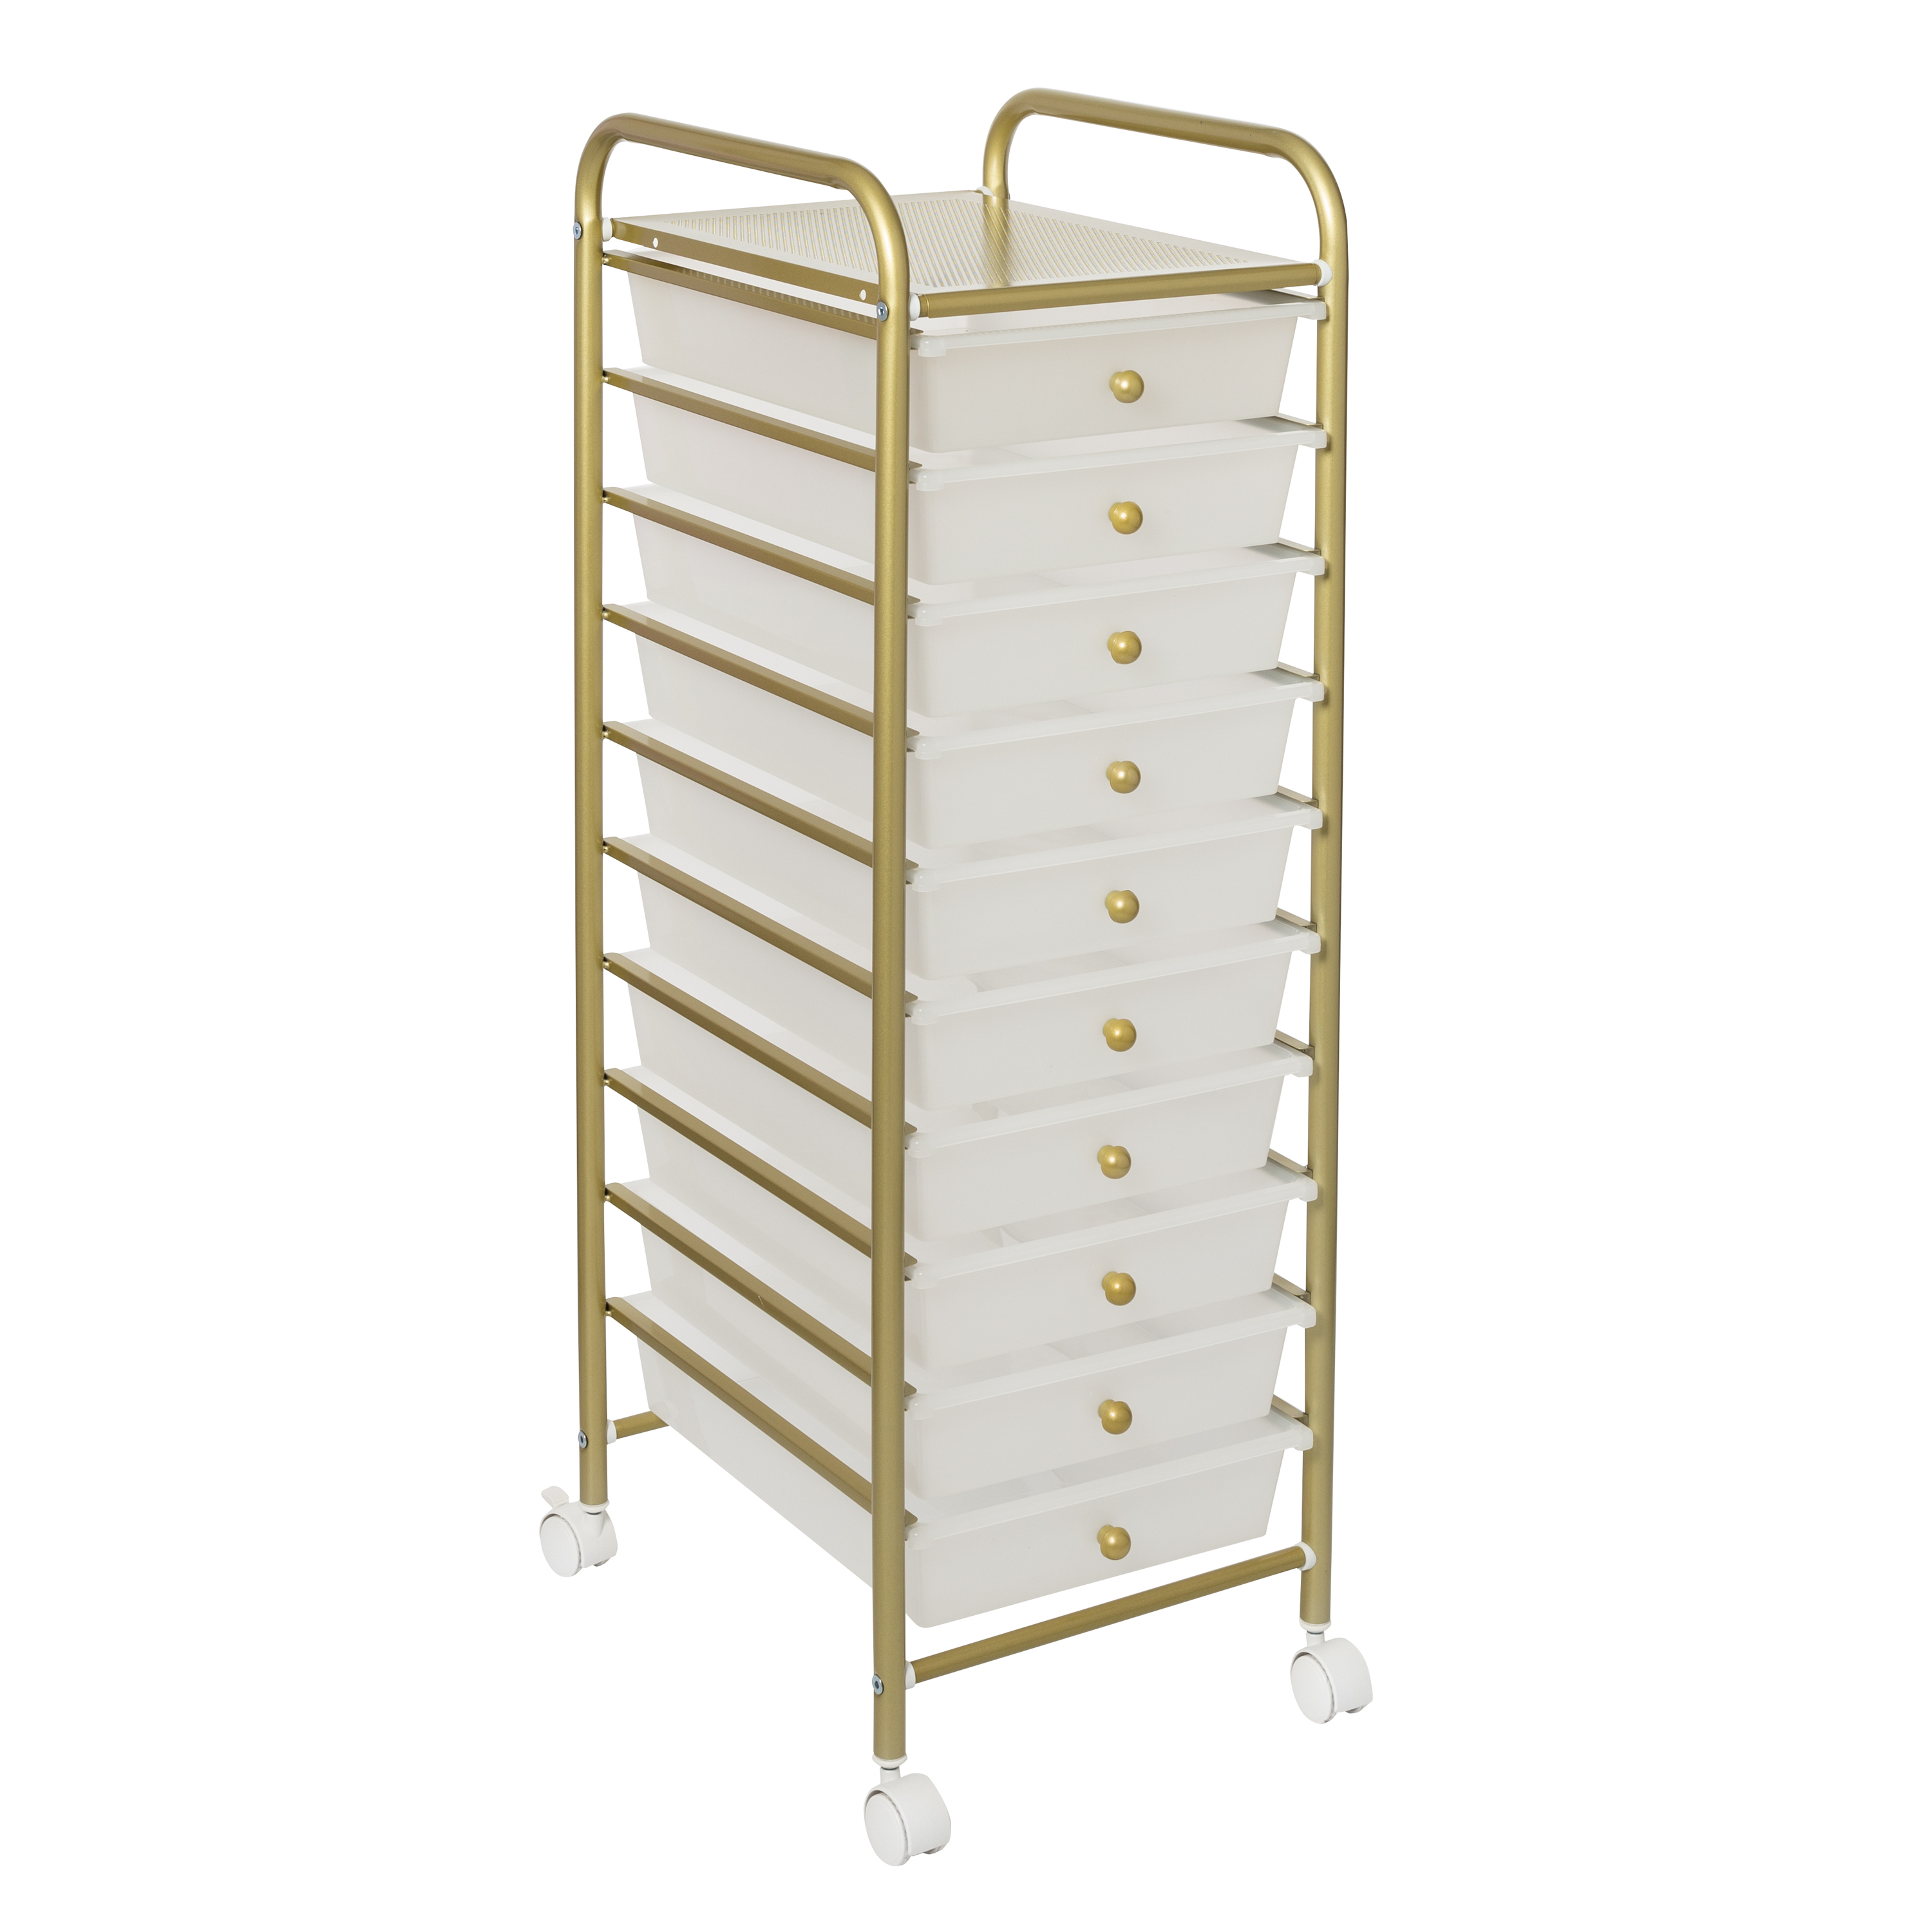 Honey-Can-Do Plastic and Steel 10-Drawer Rolling Storage Cart with 1 Shelf, Clear/Gold - image 3 of 10